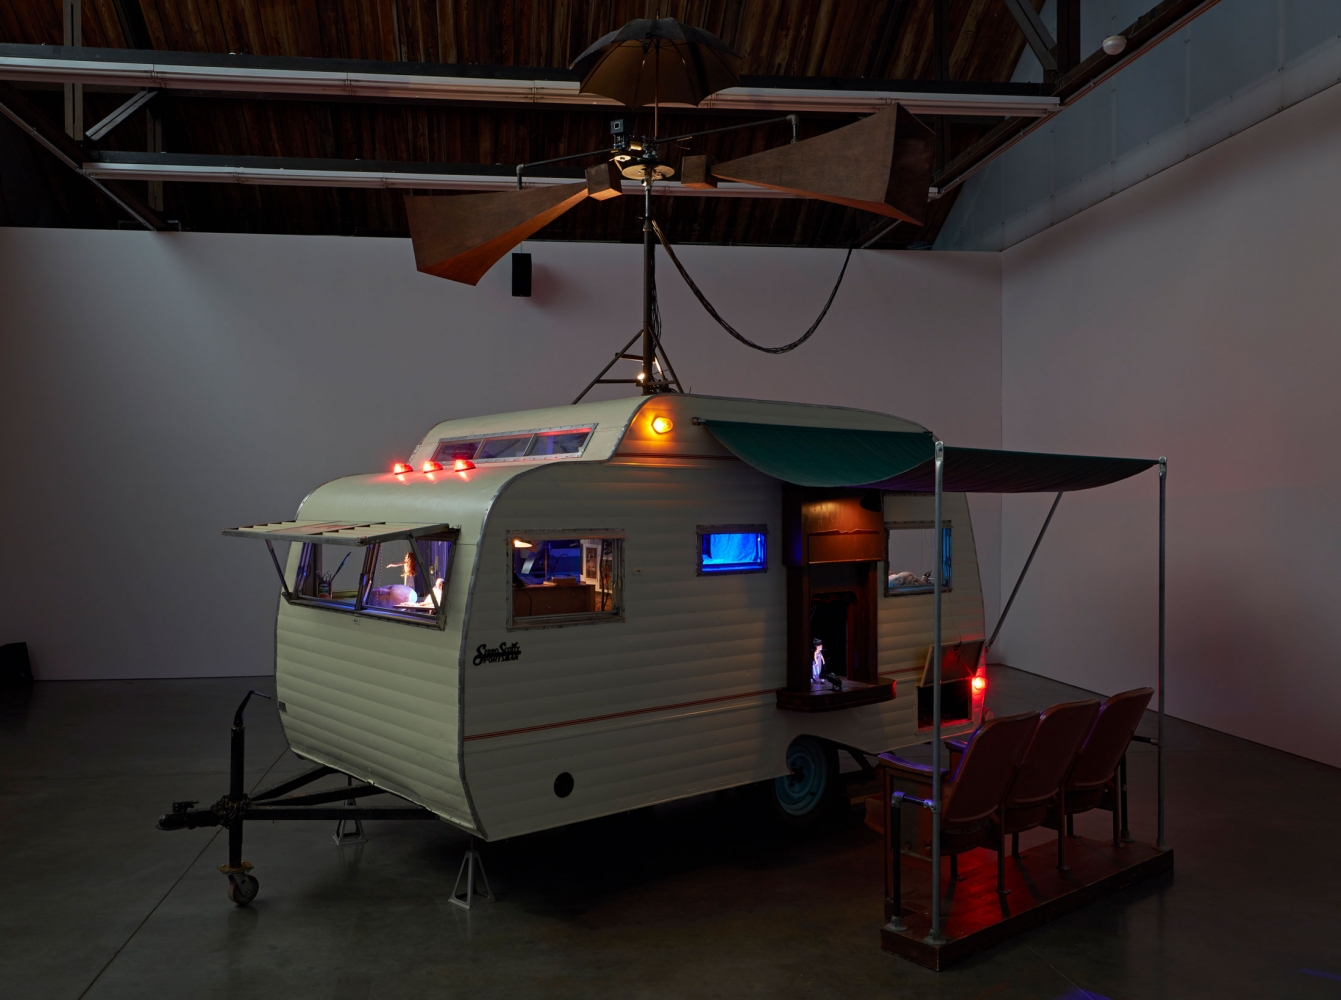 Janet Cardiff and&amp;nbsp;George Bures Miller
The Marionette Maker,&amp;nbsp;2014
Mixed media installation including caravan, marionettes, robotics, audio, and lighting
​Duration: Approximately 14 minutes, looped
184 x&amp;nbsp;222 x&amp;nbsp;130 inches
(467.4 x 563.9 x 330.2 cm)
Installation view at Luhring Augustine, New York, 2015